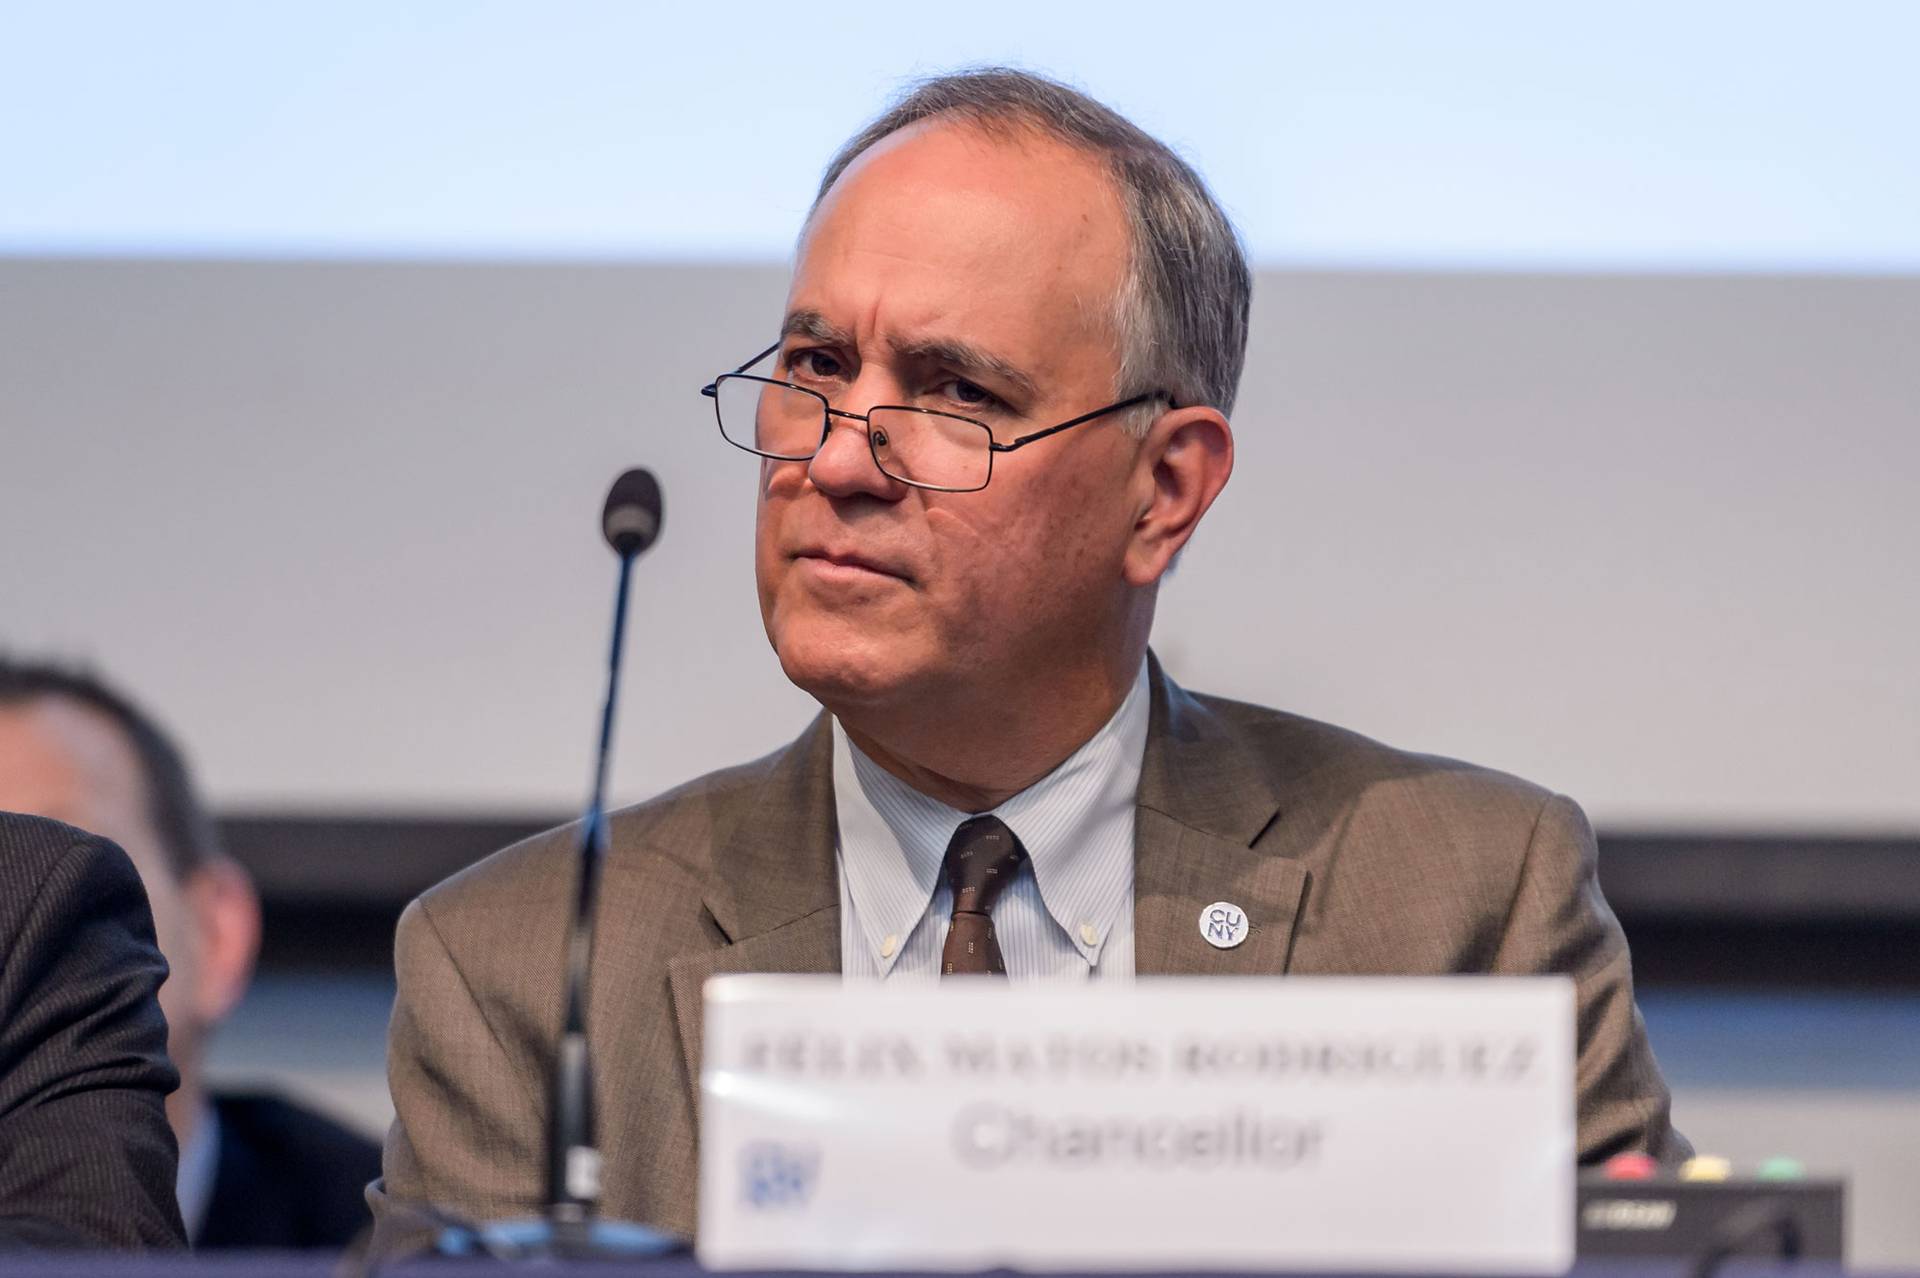 CUNY Chancellor Felix V. Matos Rodriguez, who was absent at Thursday's hearing